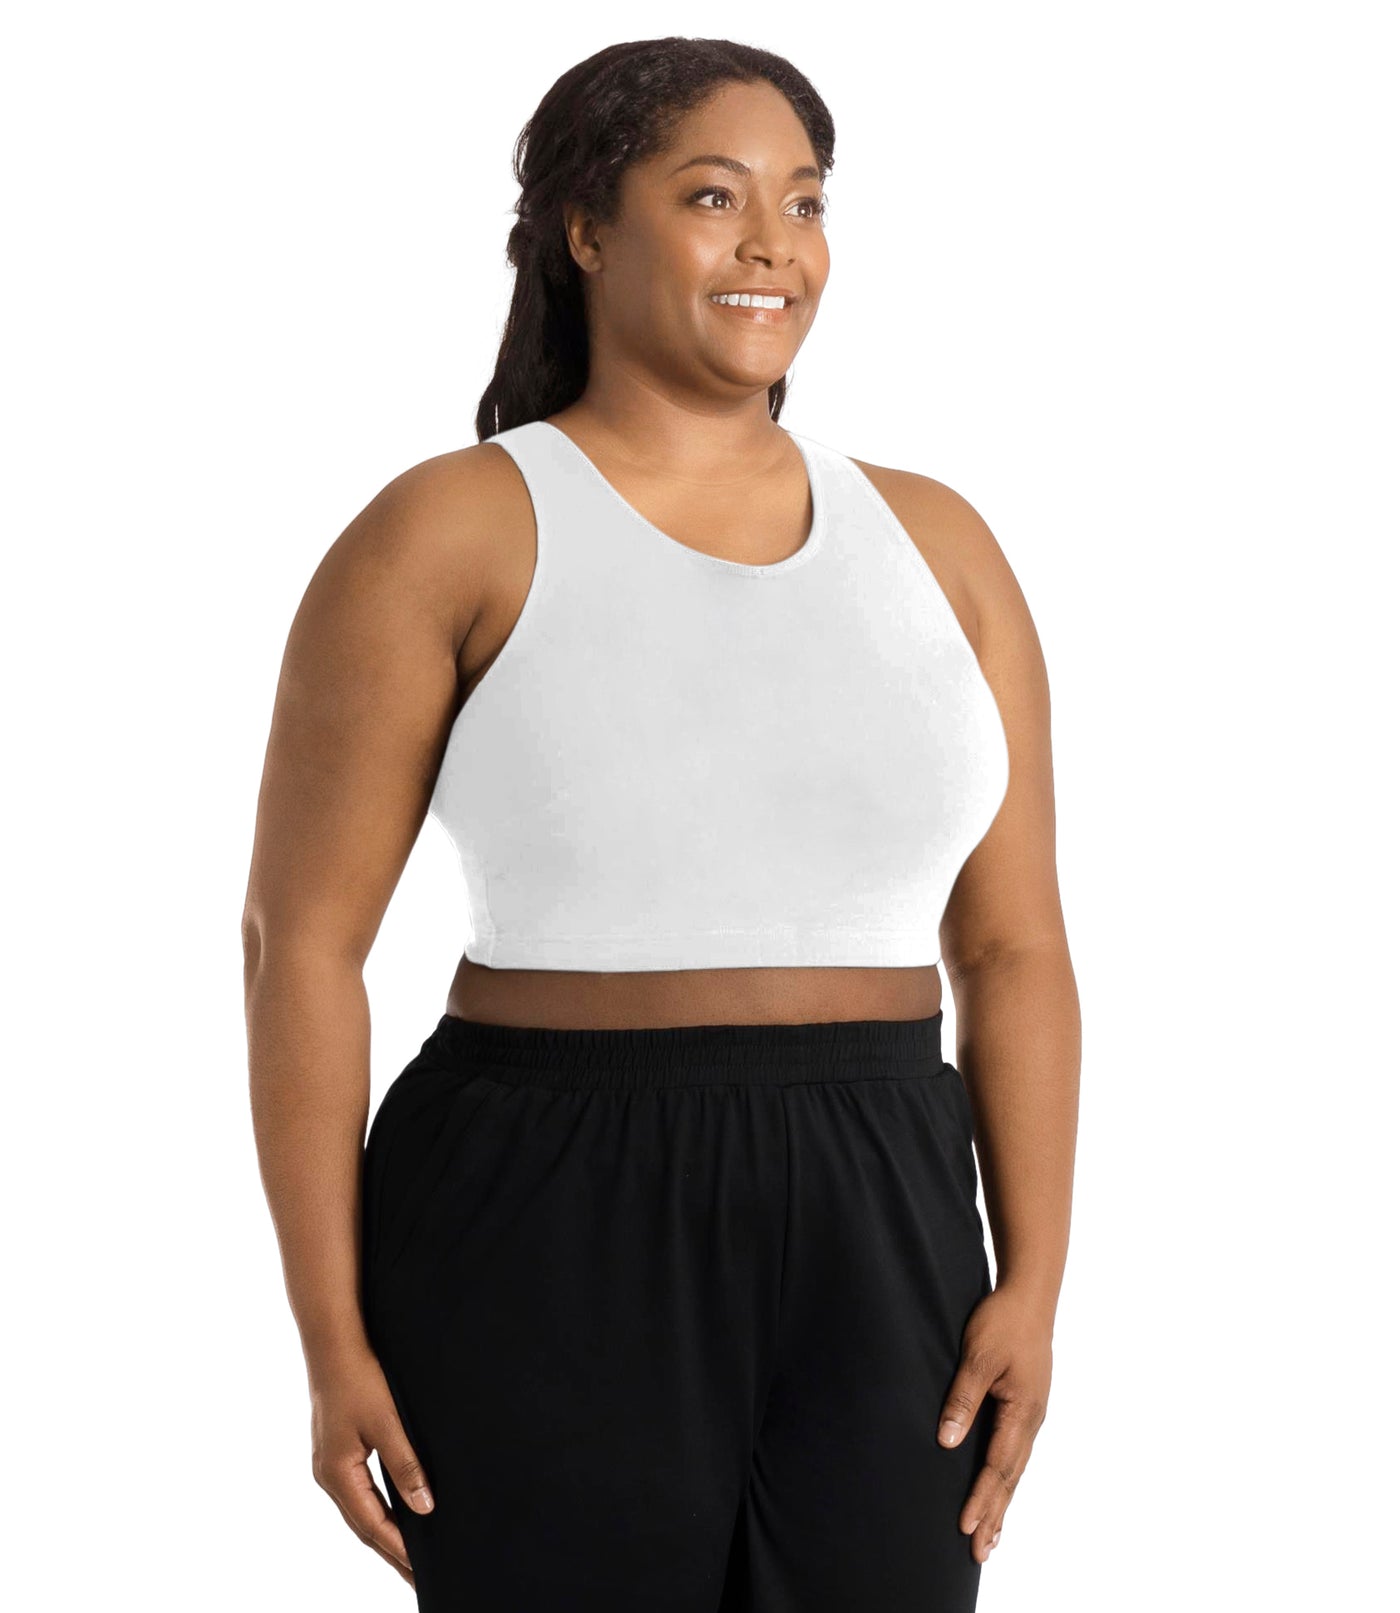 Front view of a plus size woman wearing a white JunoActive Stretch naturals full fit plus size bra. Featuring a v-neck and side bust darts for a full fit. She is also wearing black JunoActive plus size pants.